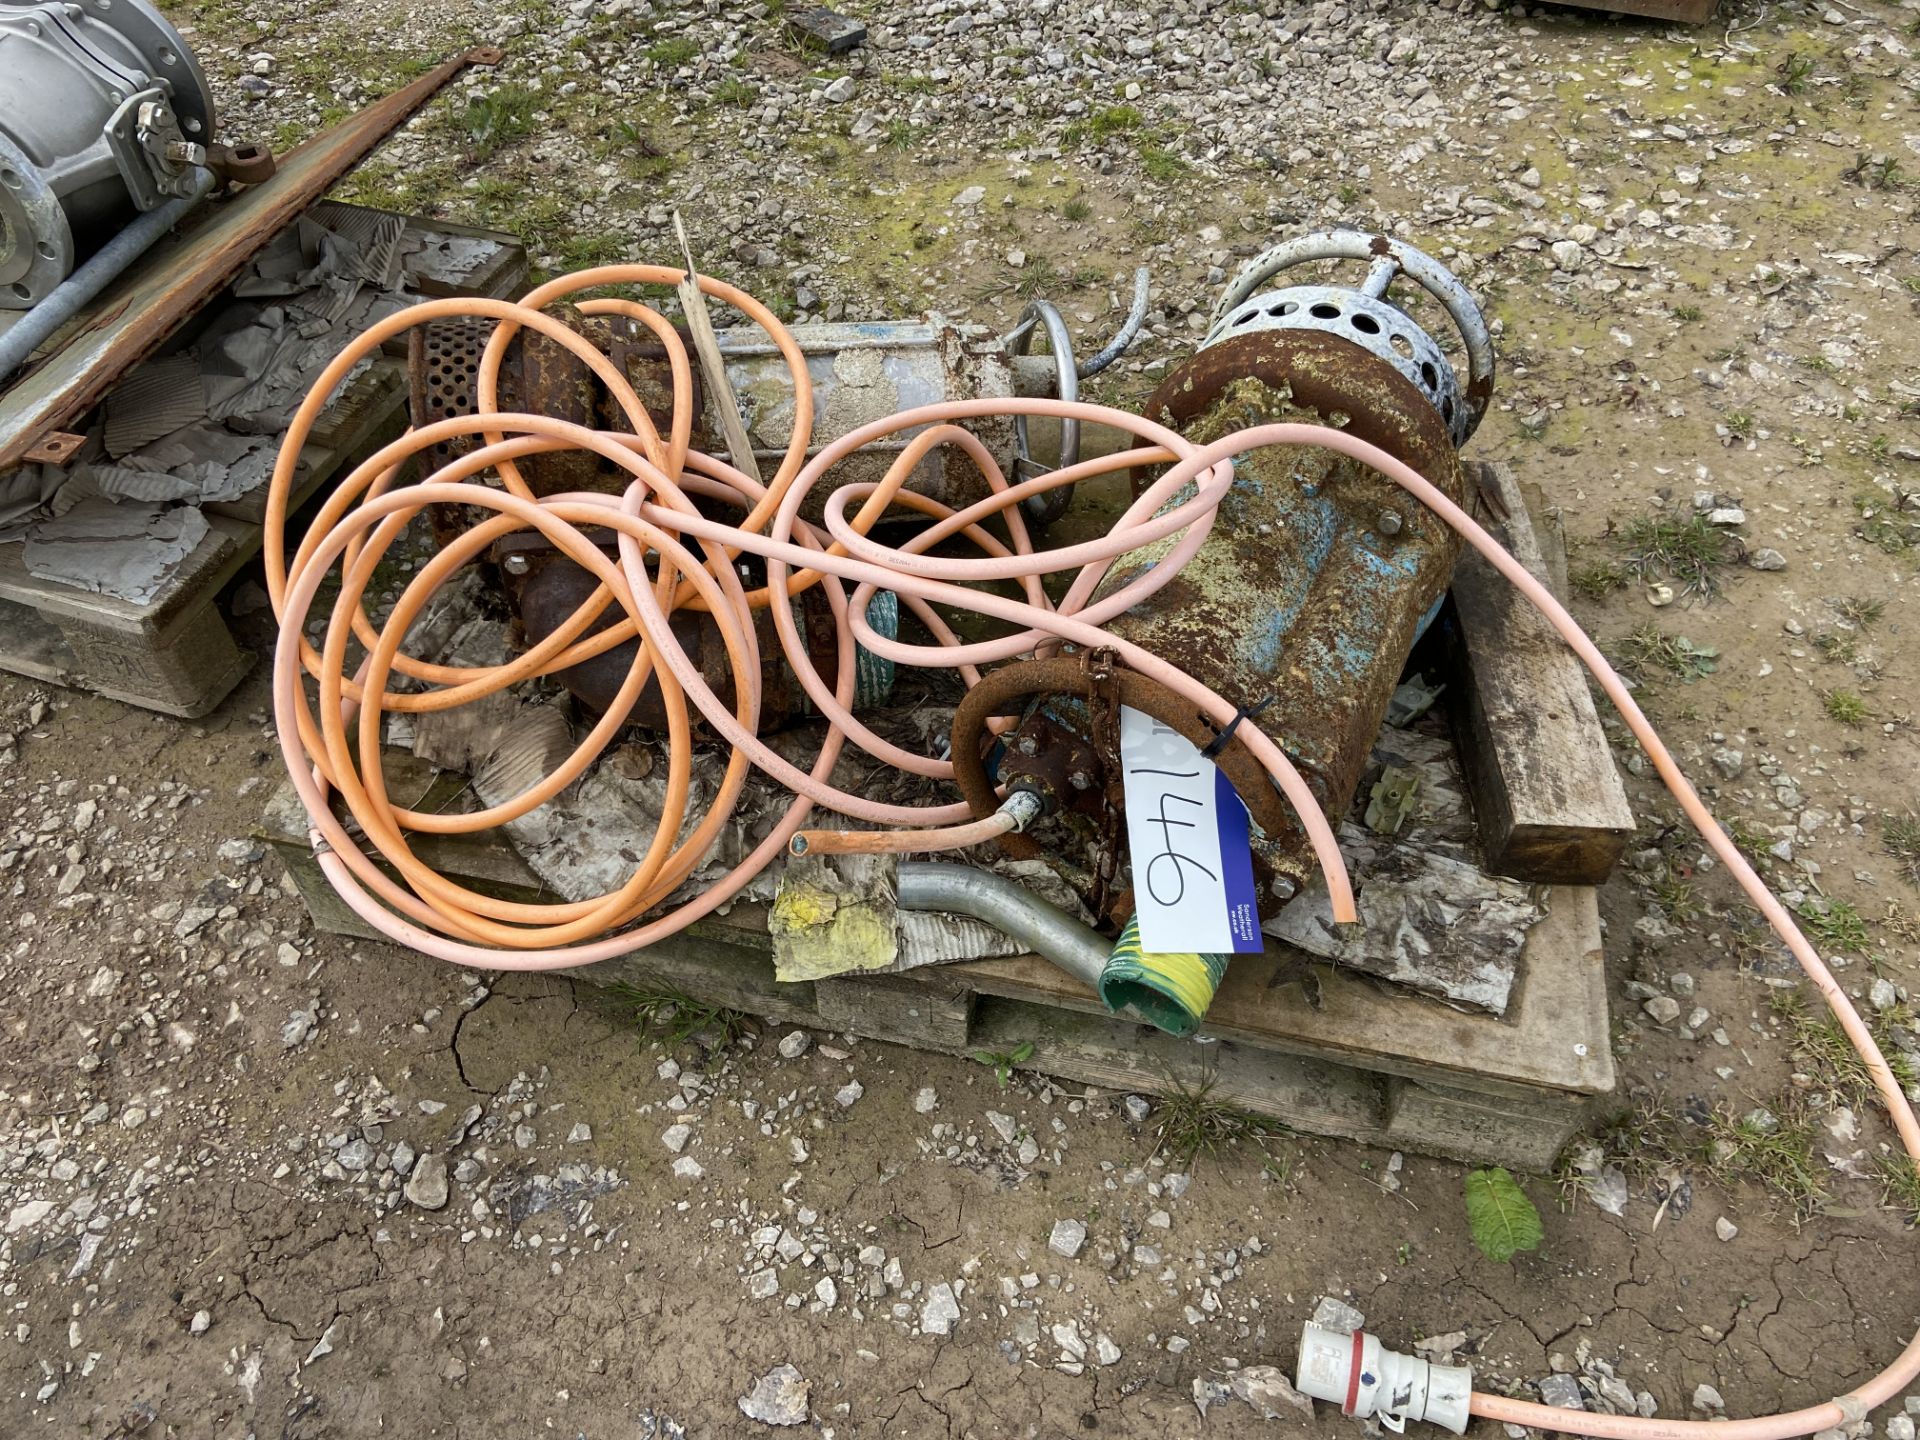 Two Submersible Pumps, on pallet, lot located in Bretherton, Lancashire, lot loaded free of charge